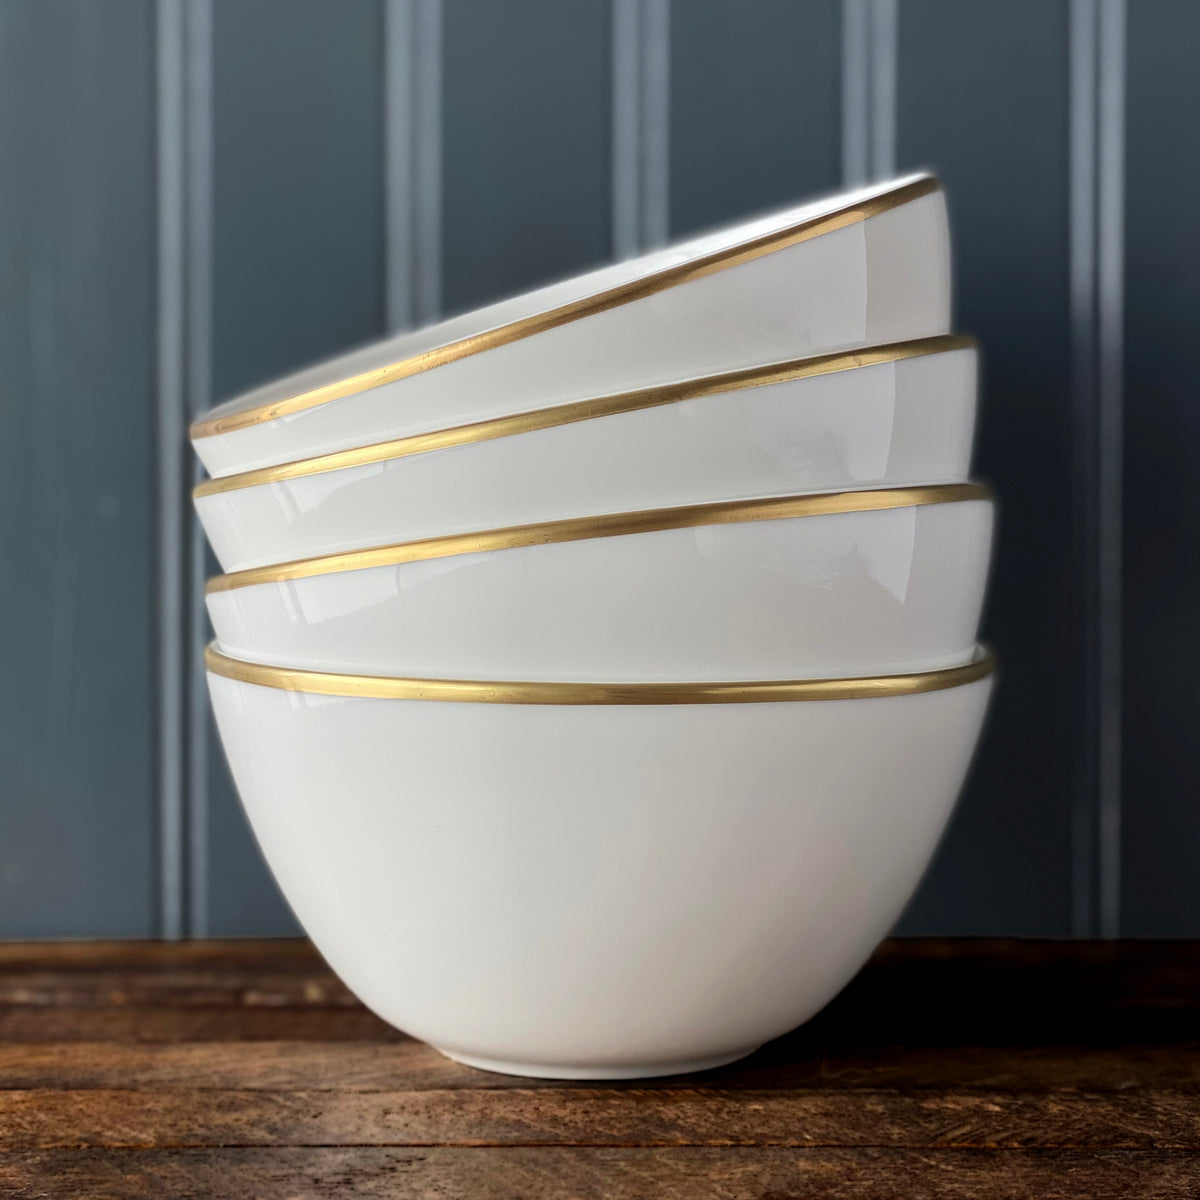 Four stacked white Caskata Artisanal Home Grace Gold Cereal Bowls with gold rims sit on a wooden surface against a dark, vertically paneled background. This sleek, versatile collection is crafted from lead-free high-fired porcelain, ensuring both elegance and durability.